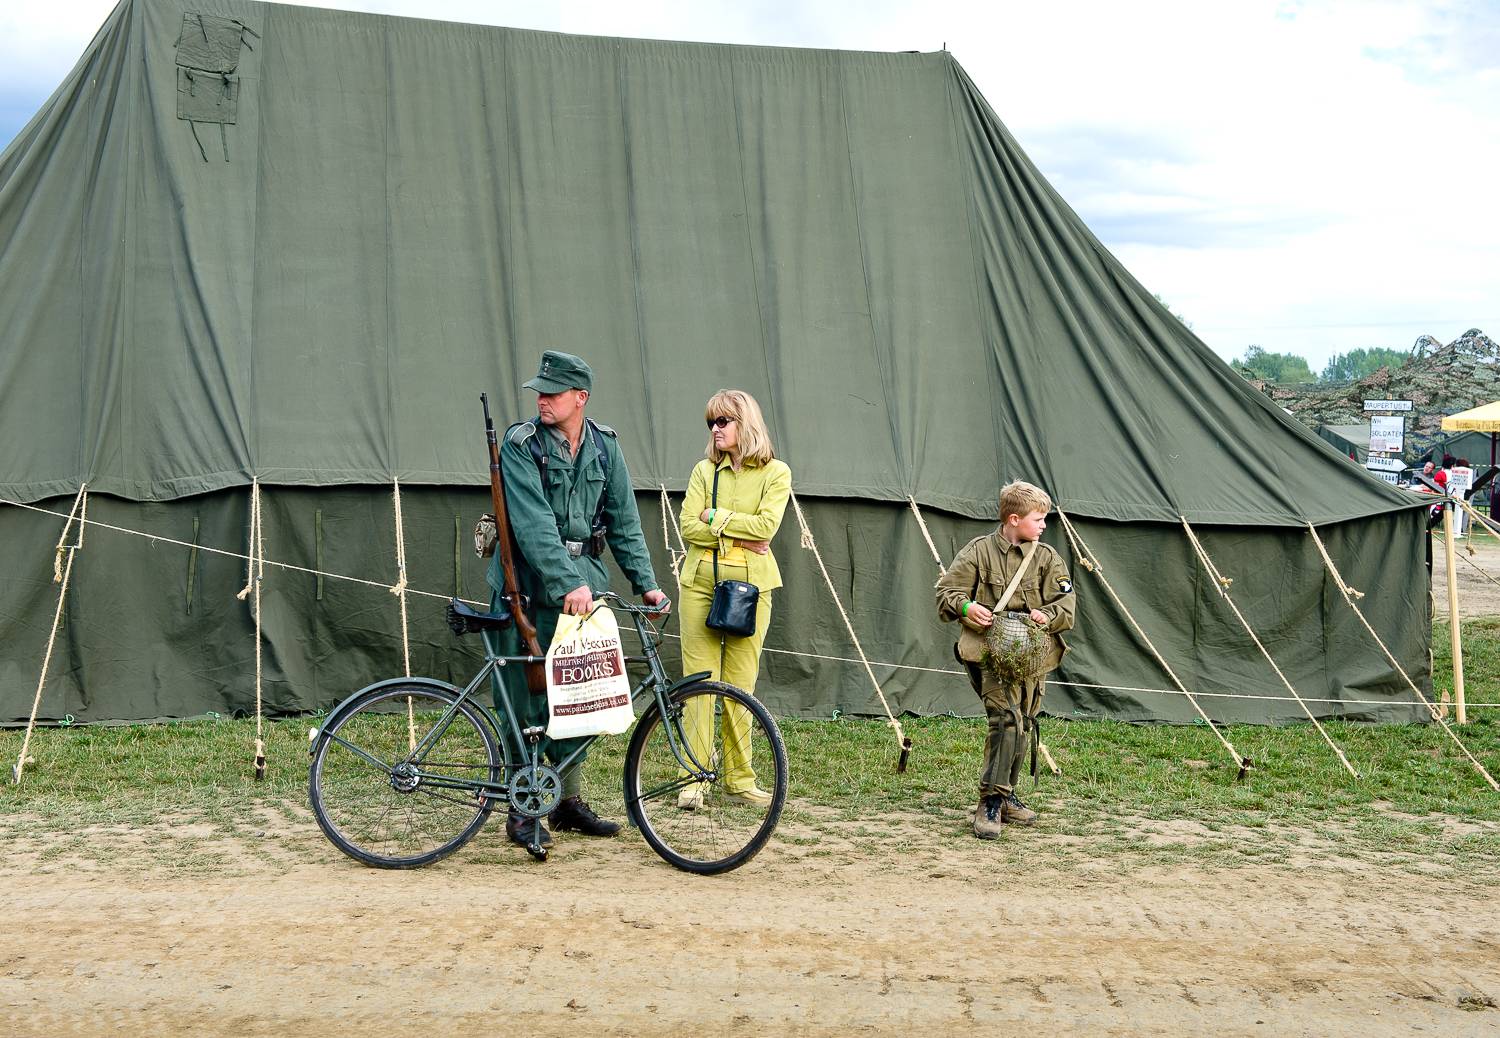  Family at War and Peace show, Kent 